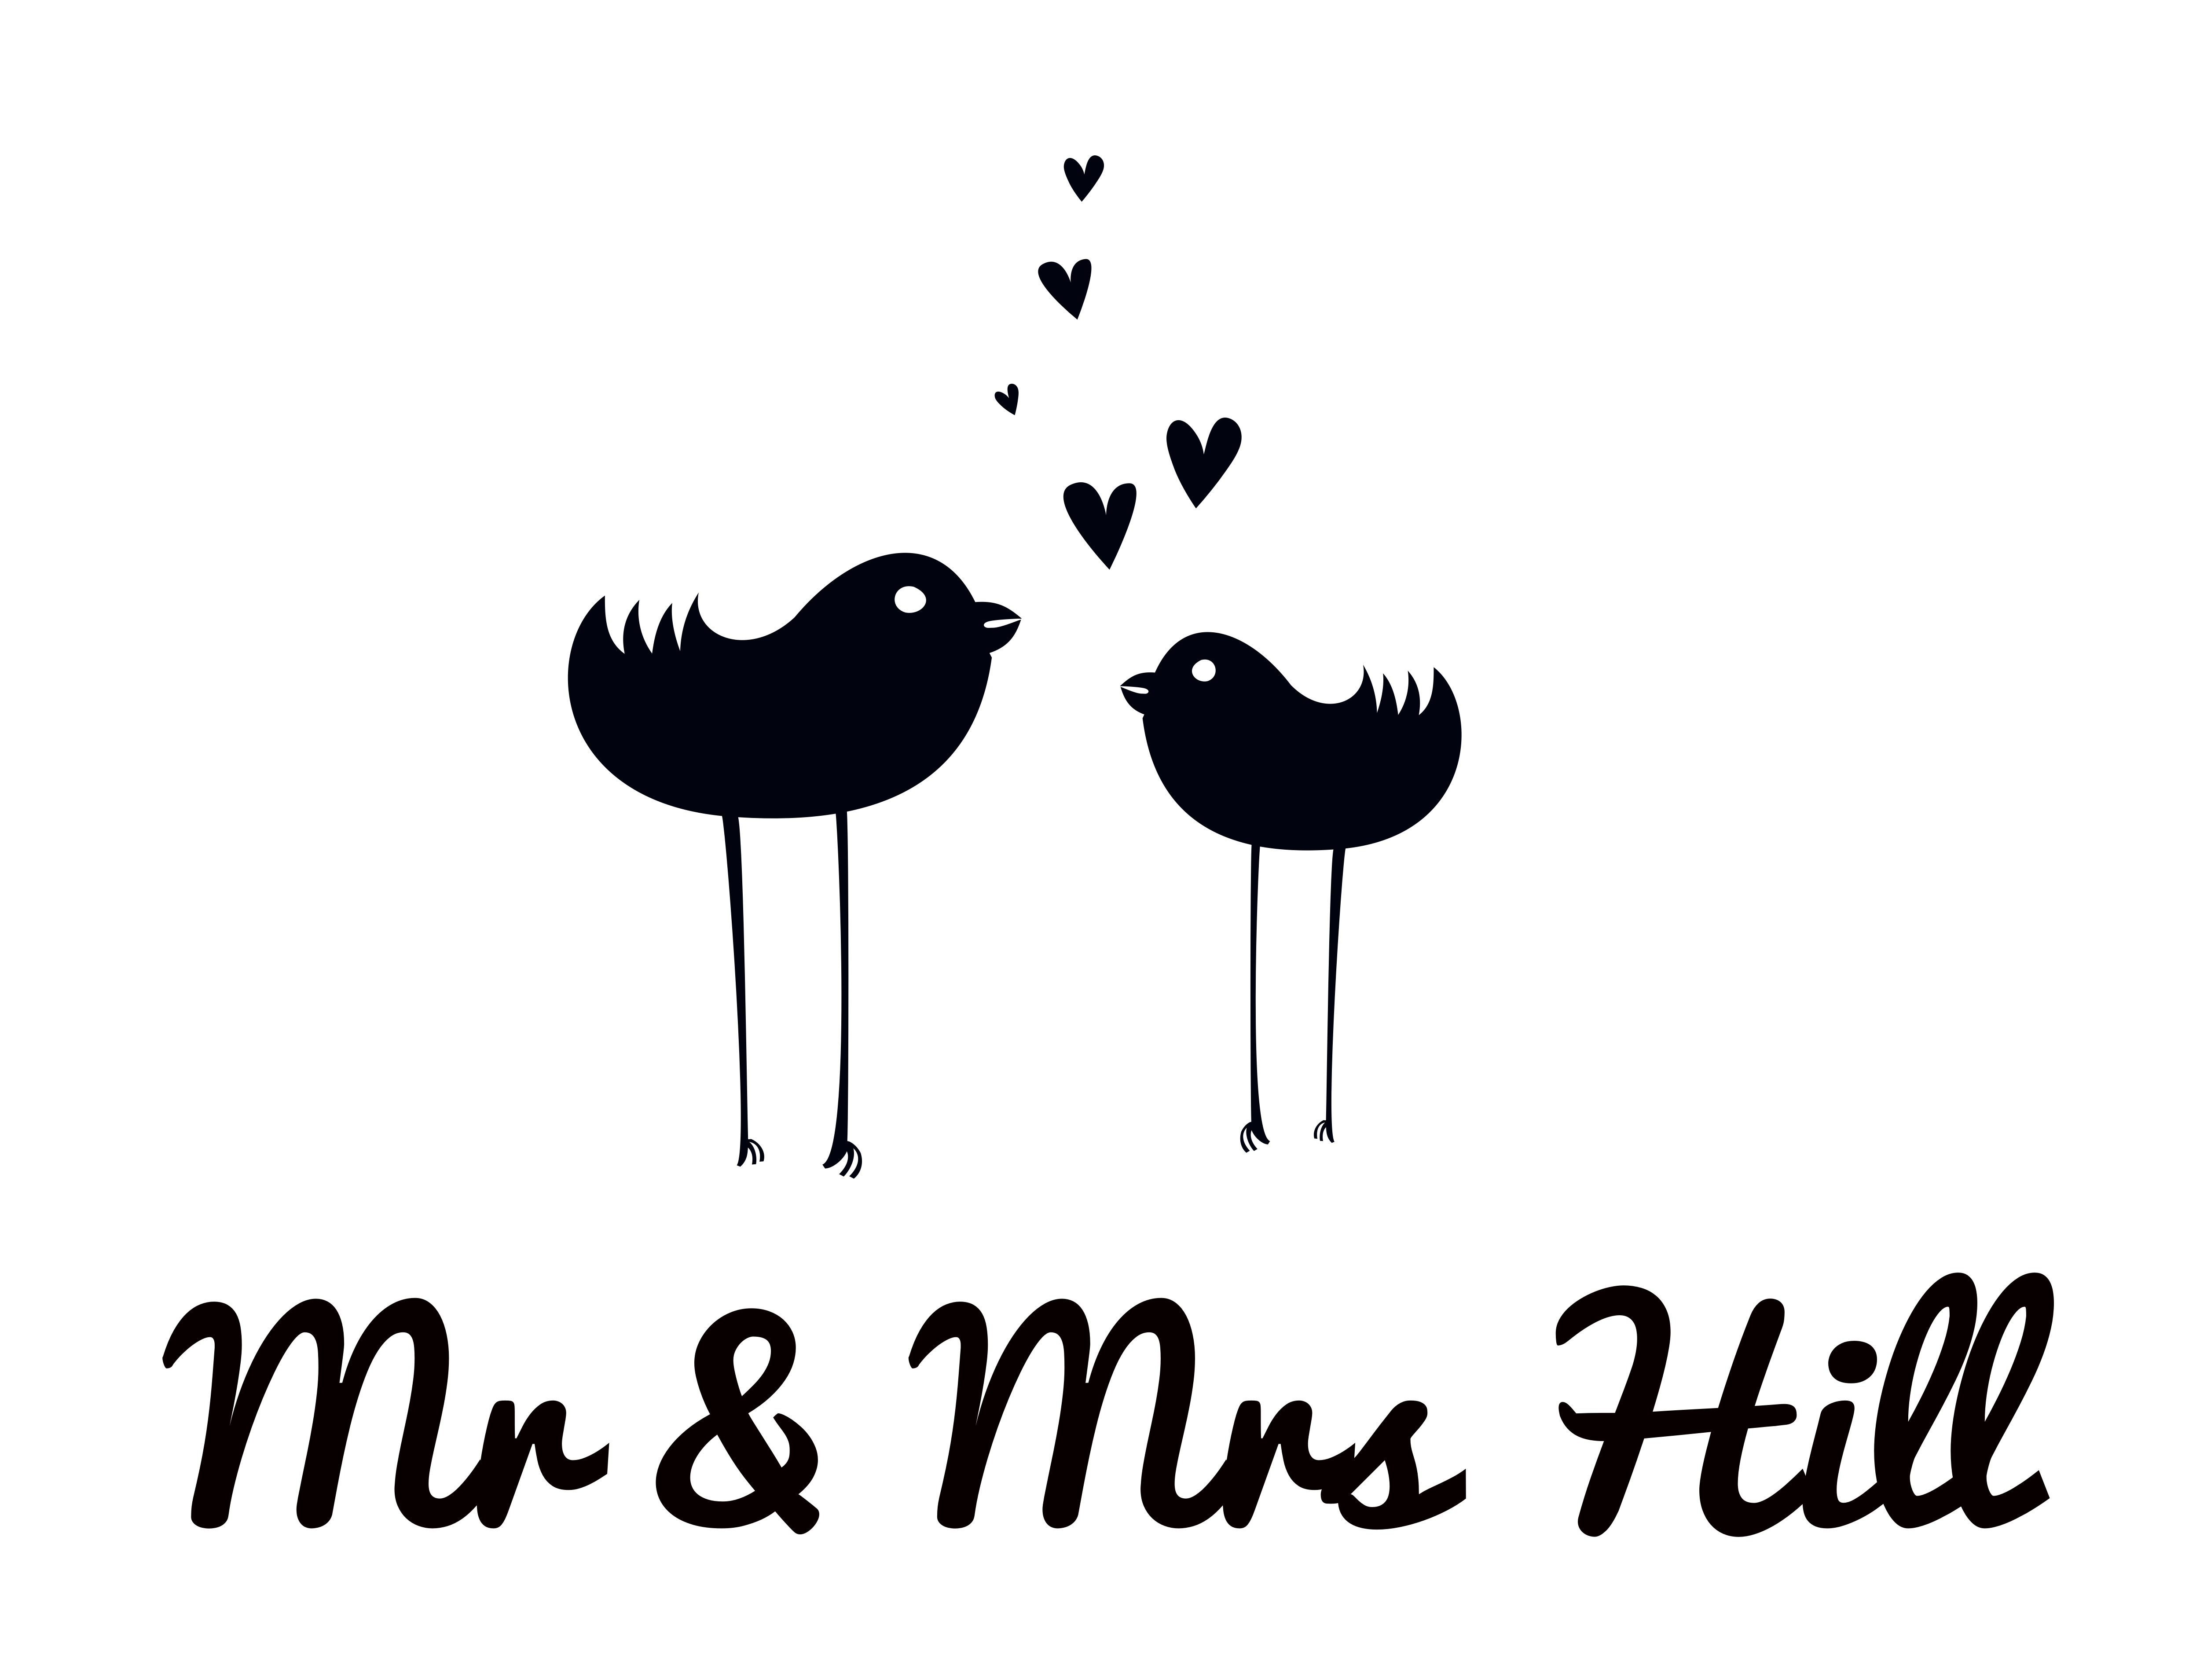 Mr and Mrs Hill logo